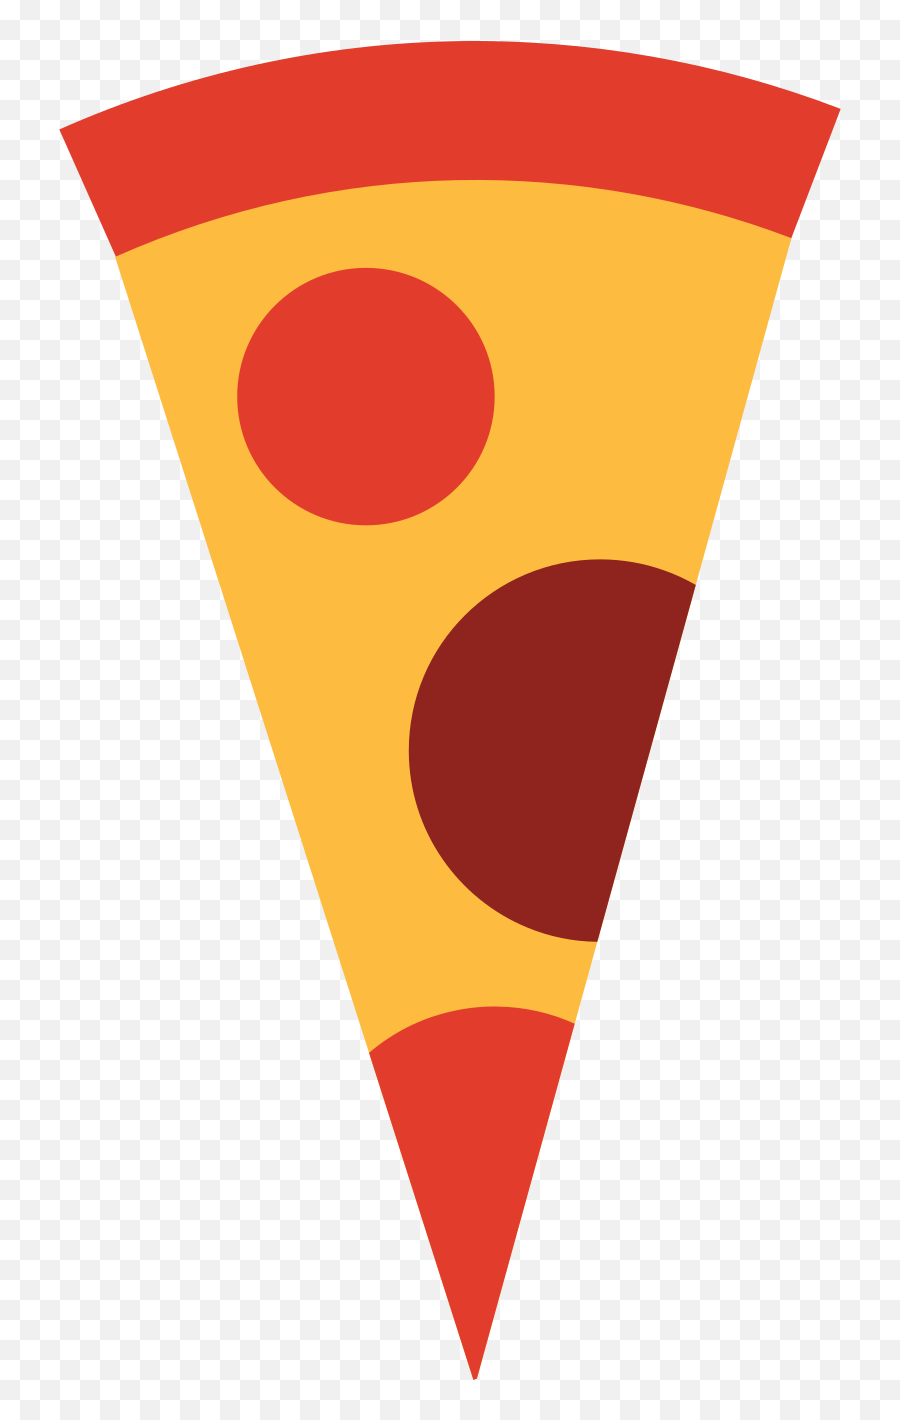 Style Slice Of Pizza Vector Images In Png And Svg Icons8 - Dot,Pie Slice Icon